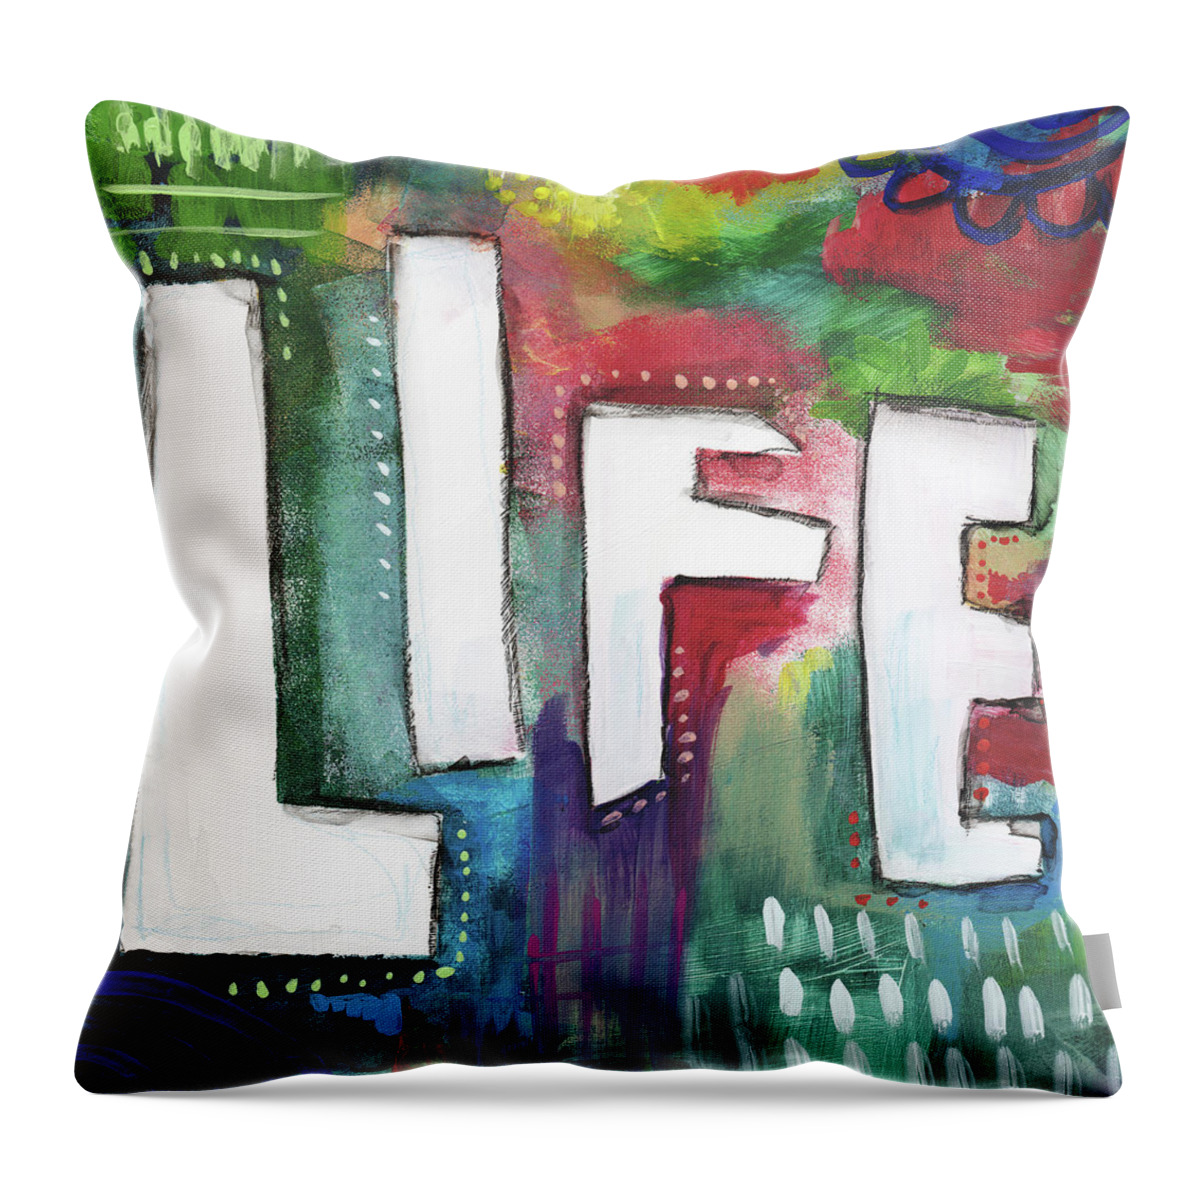 Outsider Throw Pillow featuring the painting Colorful Life- Art by Linda Woods by Linda Woods